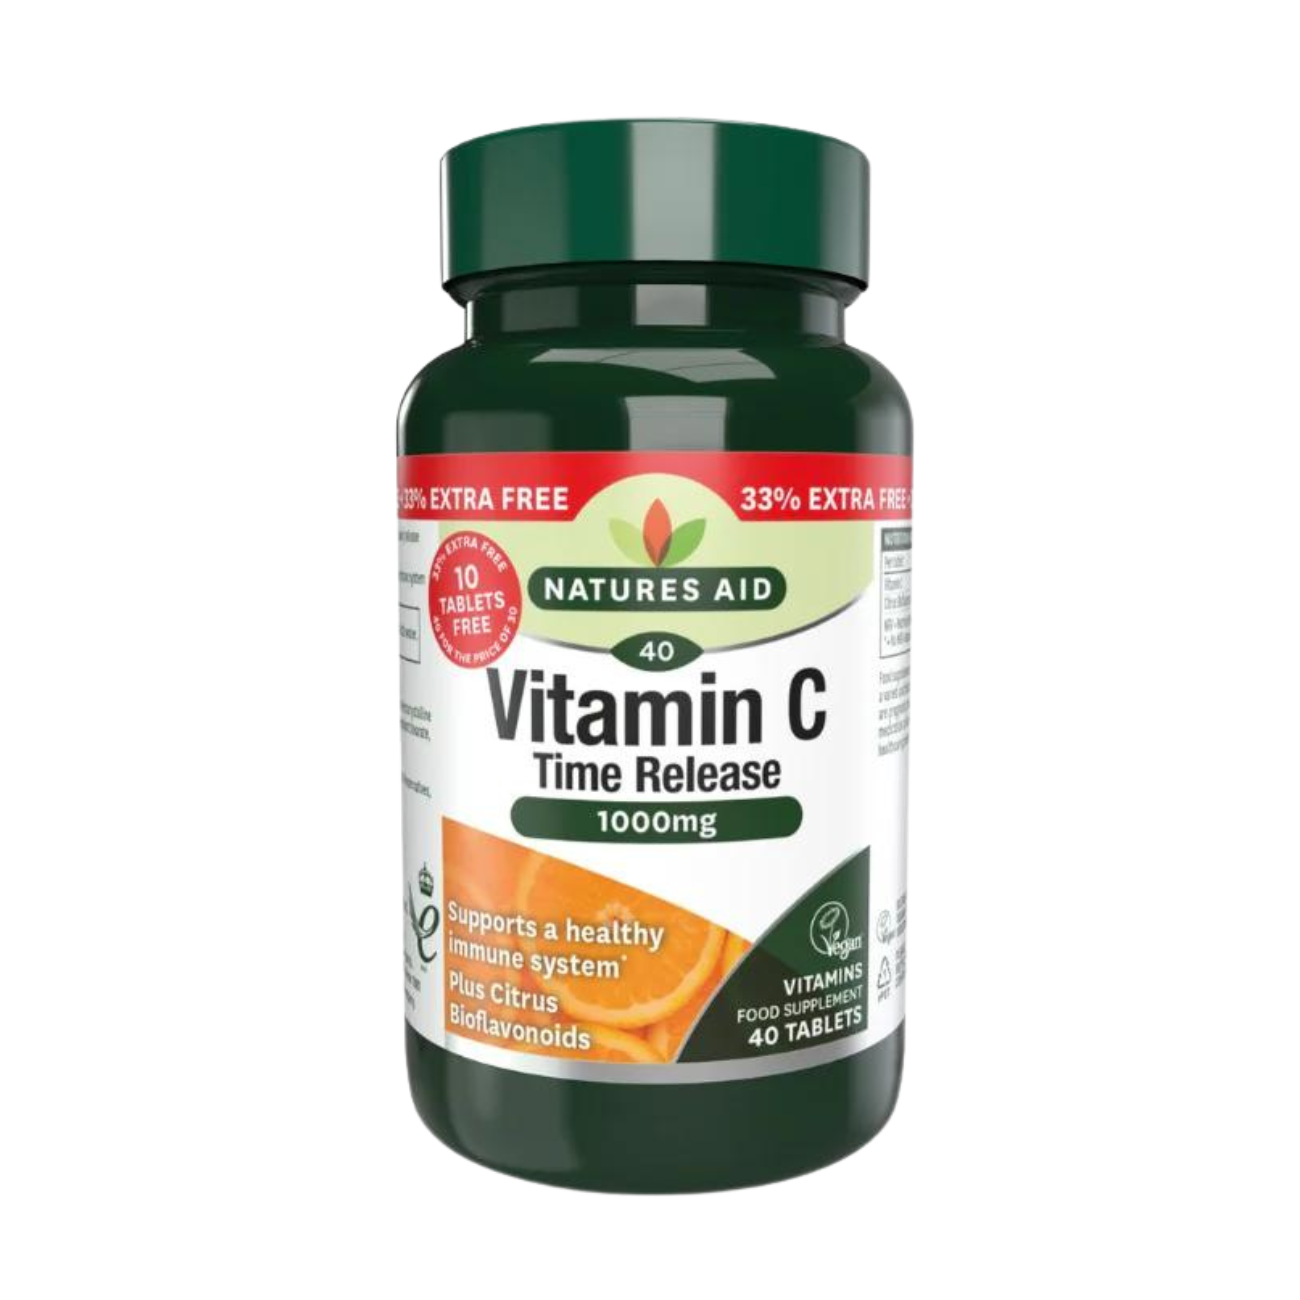 Natures Aid Vitamin C 1000mg with Citrus Bioflavonoids 40 Tablets